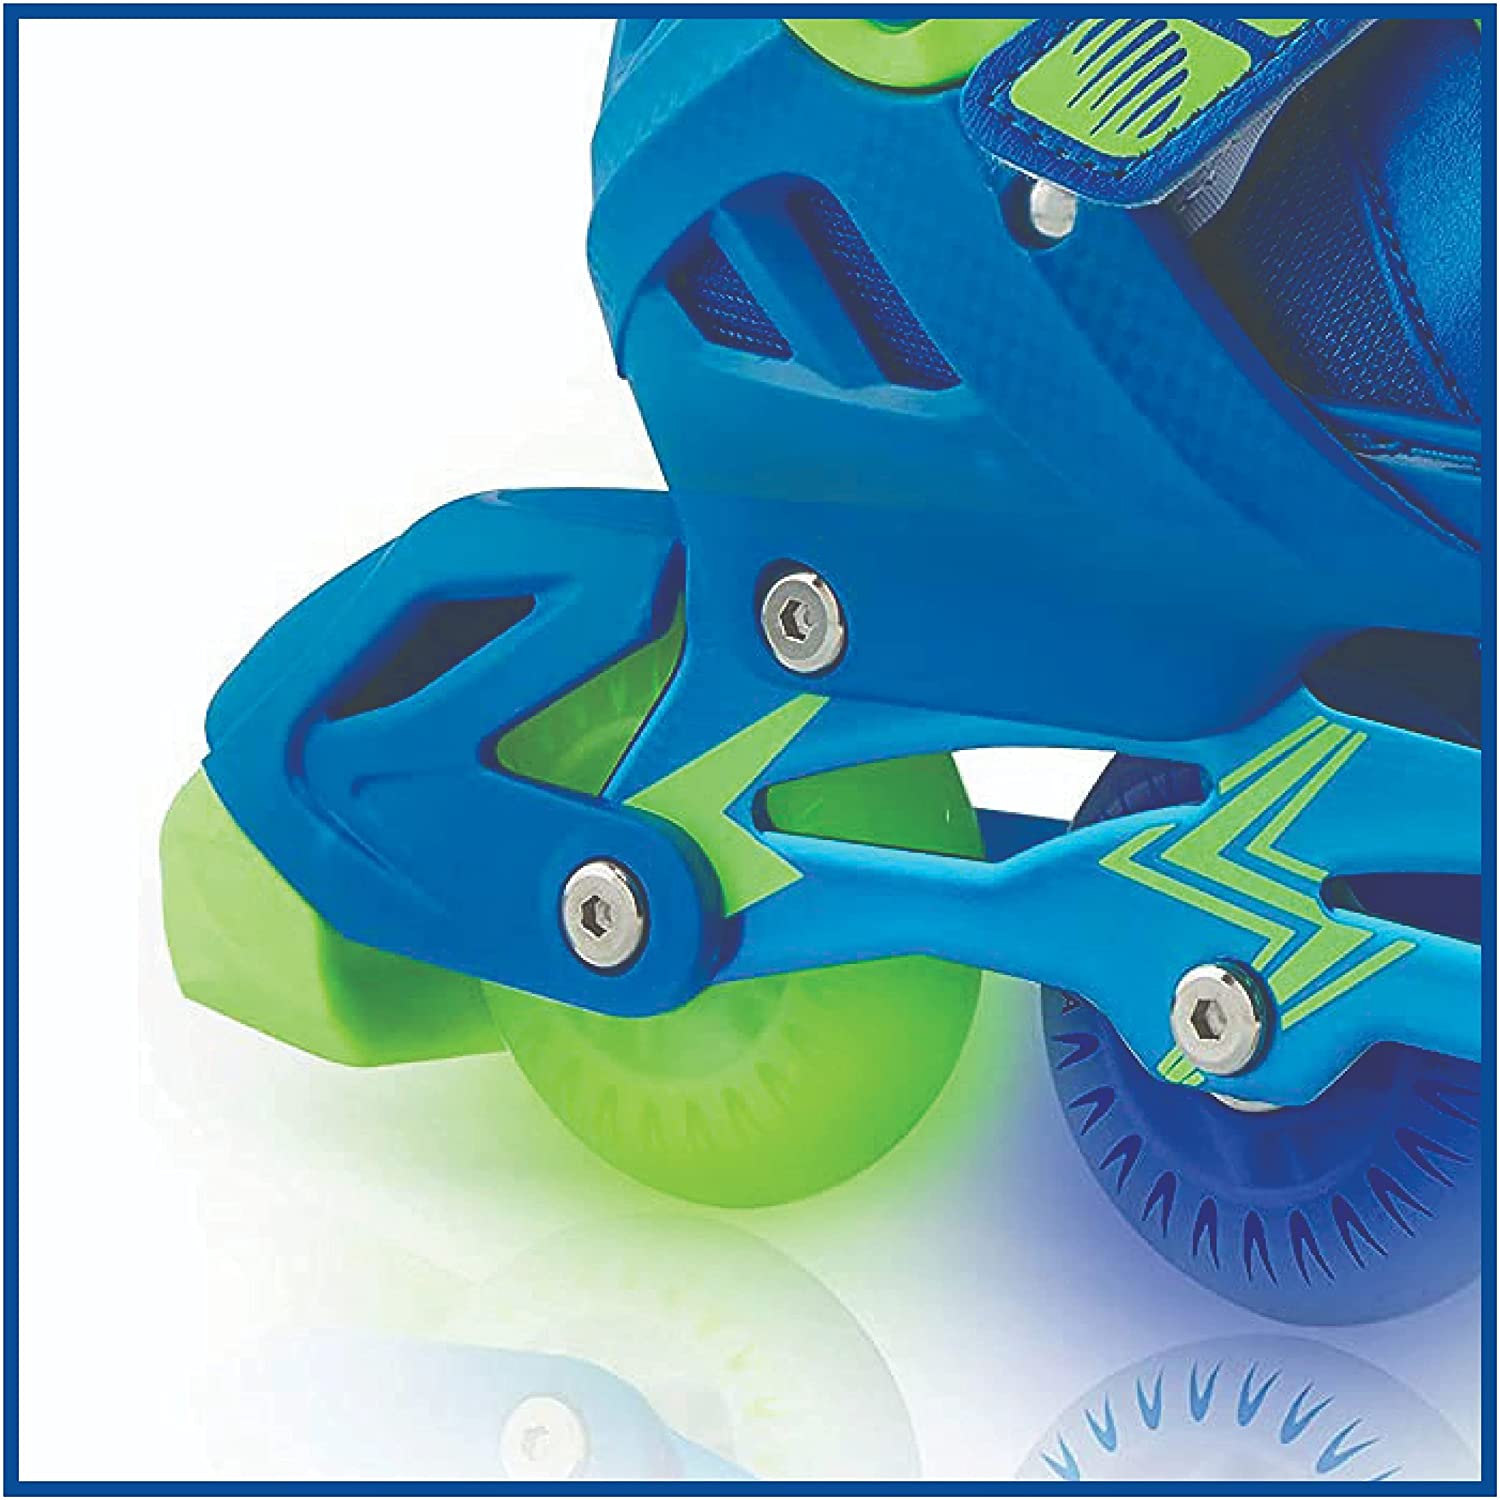 Replacement brake for rollerblades - Xino Sports